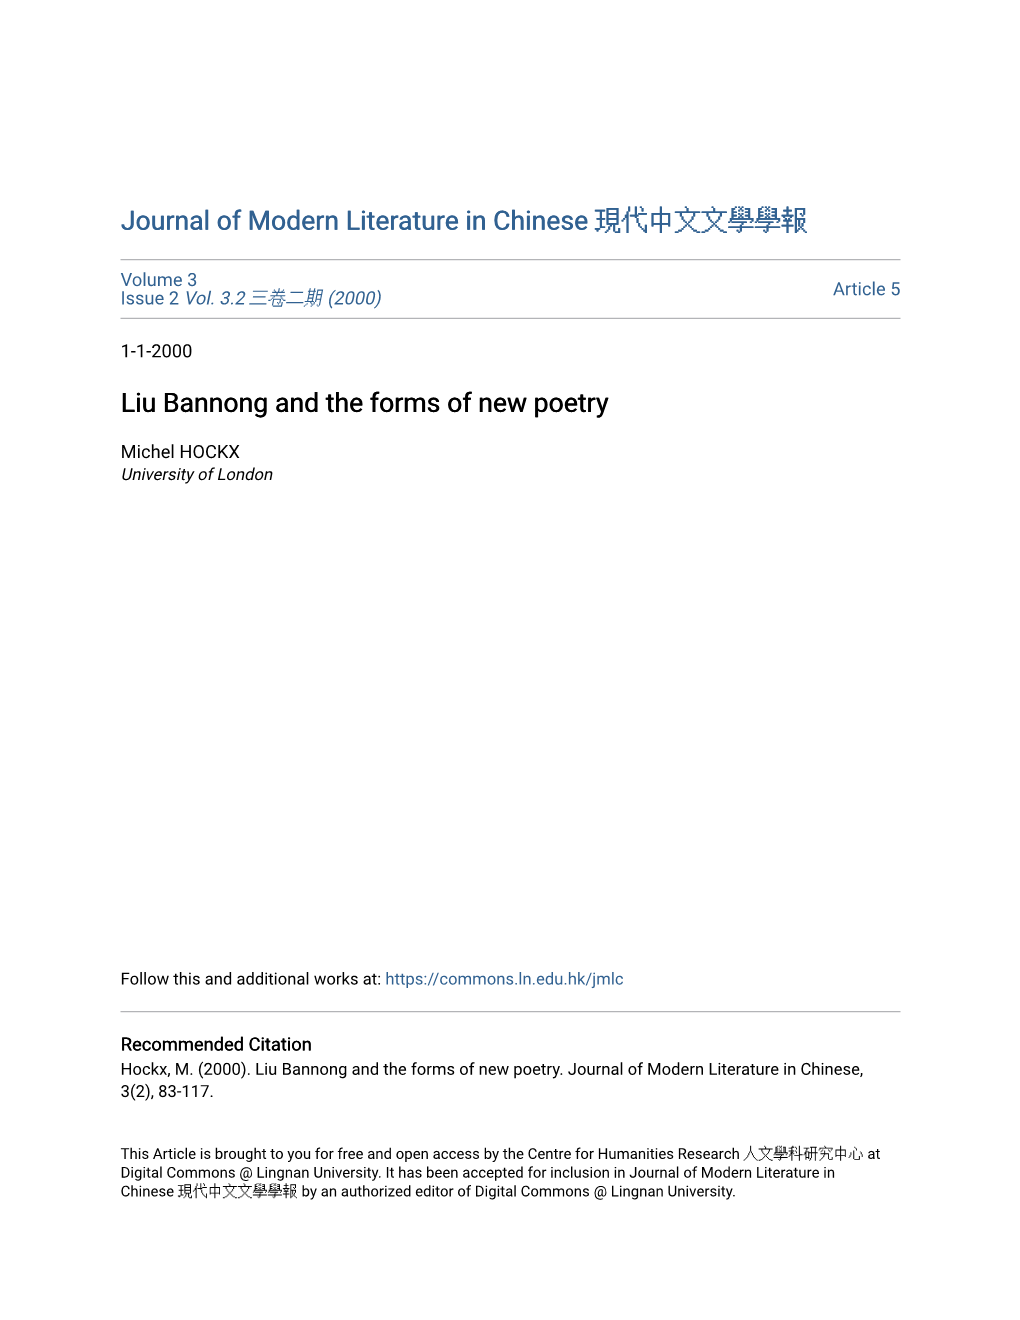 Liu Bannong and the Forms of New Poetry